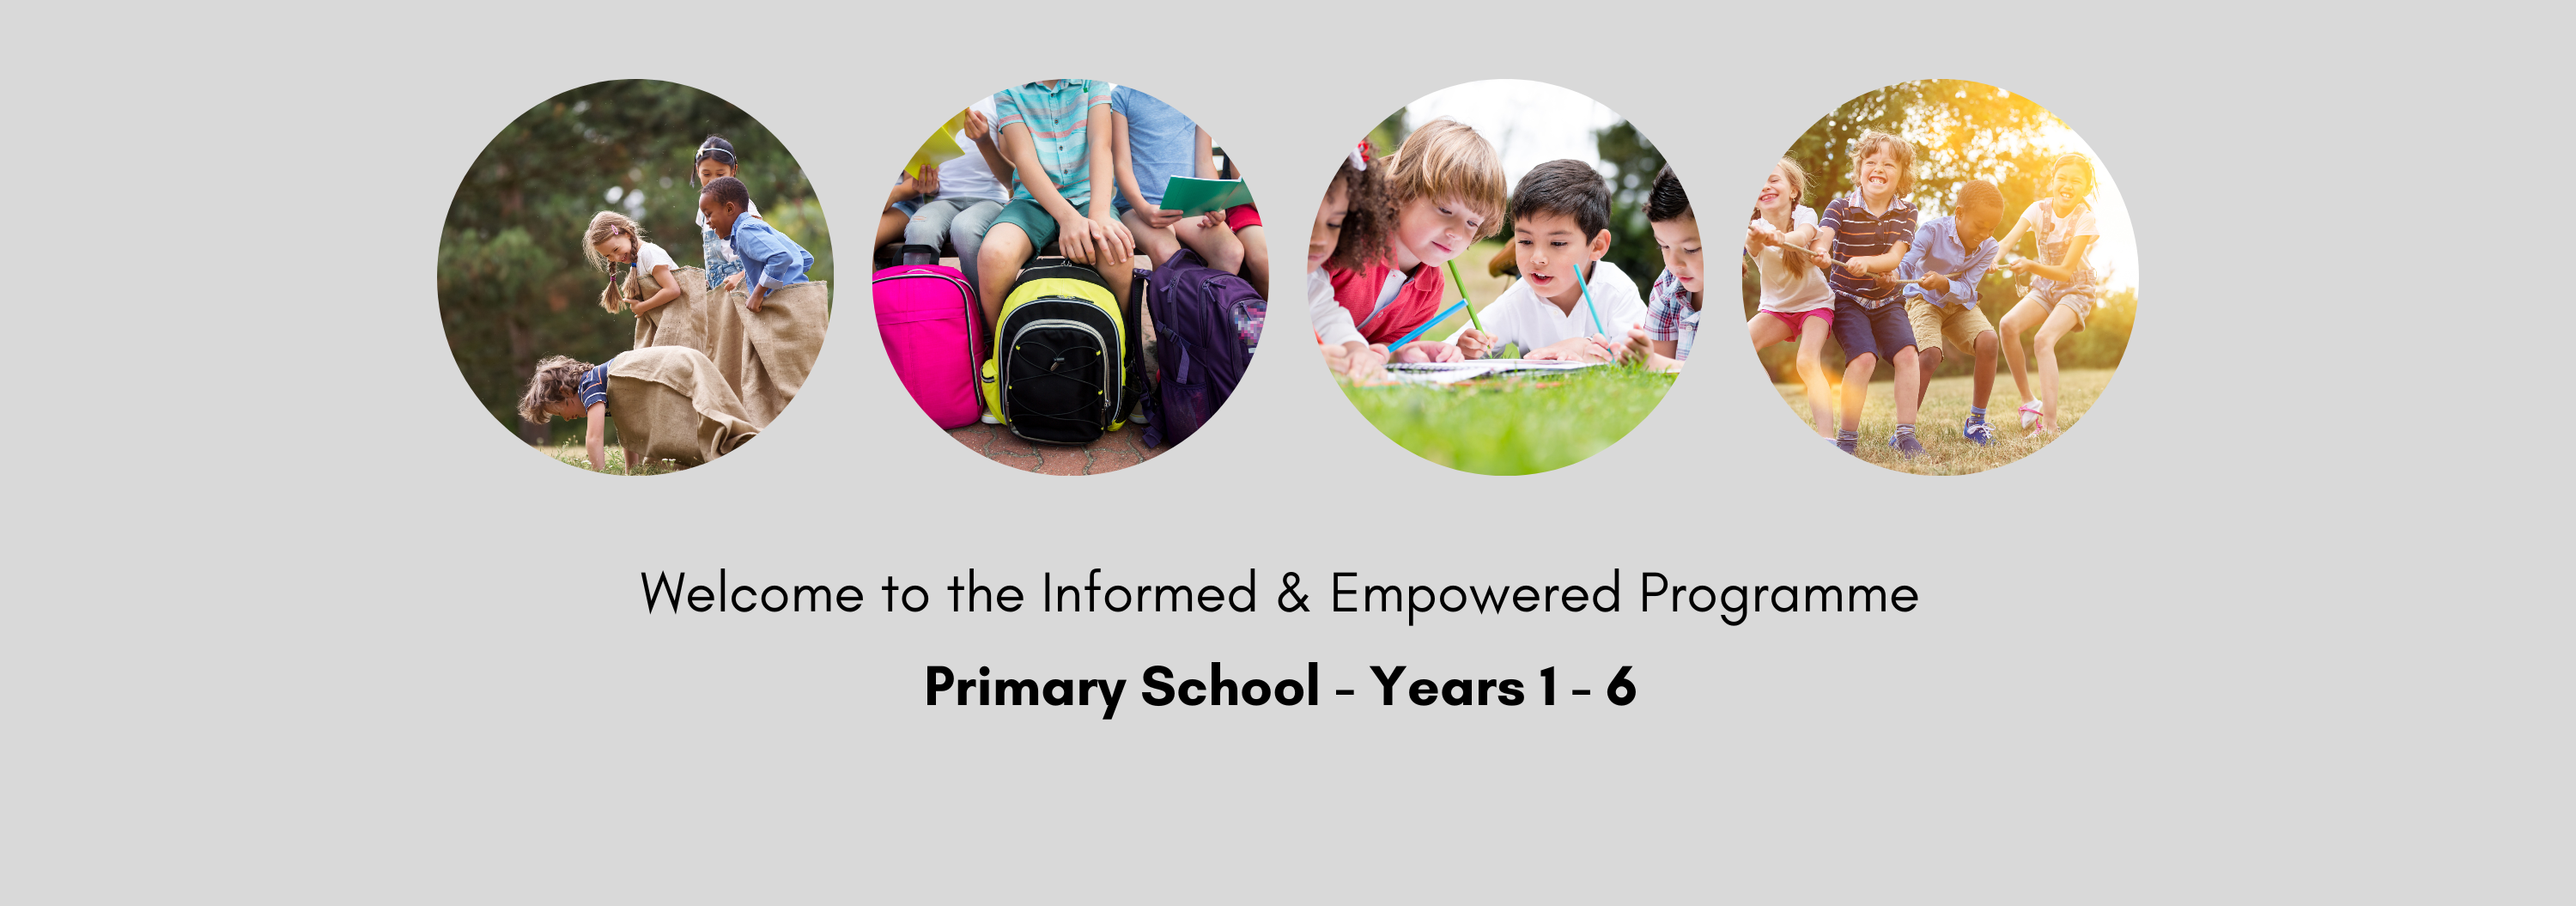 Our Kids Online Informed & Empowered Programme